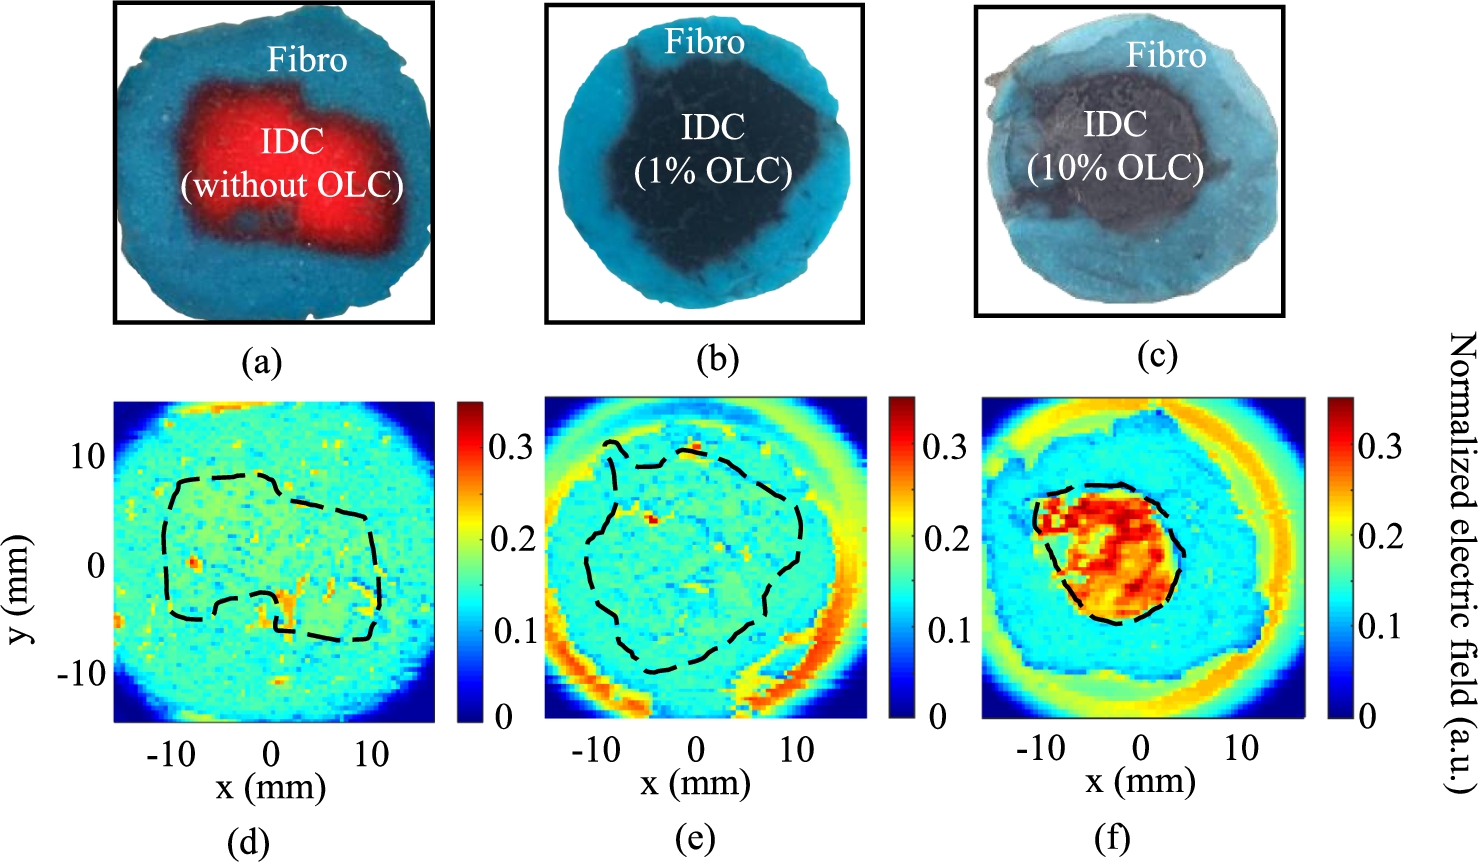 THz reflection imaging of combined phantoms shown in photographs for (a) photo of IDC phantom with no onion-like carbon (OLC), (b) photo of IDC phantom with 1% of 100 nm OLC, and (c) photo of IDC phantom with 10% of 100 nm OLC. THz images in (d)–(f) show the resulting THz reflection images for (d) no OLC in IDC, (e) 1% OLC in IDC, and (f) 10% OLC in IDC [5].